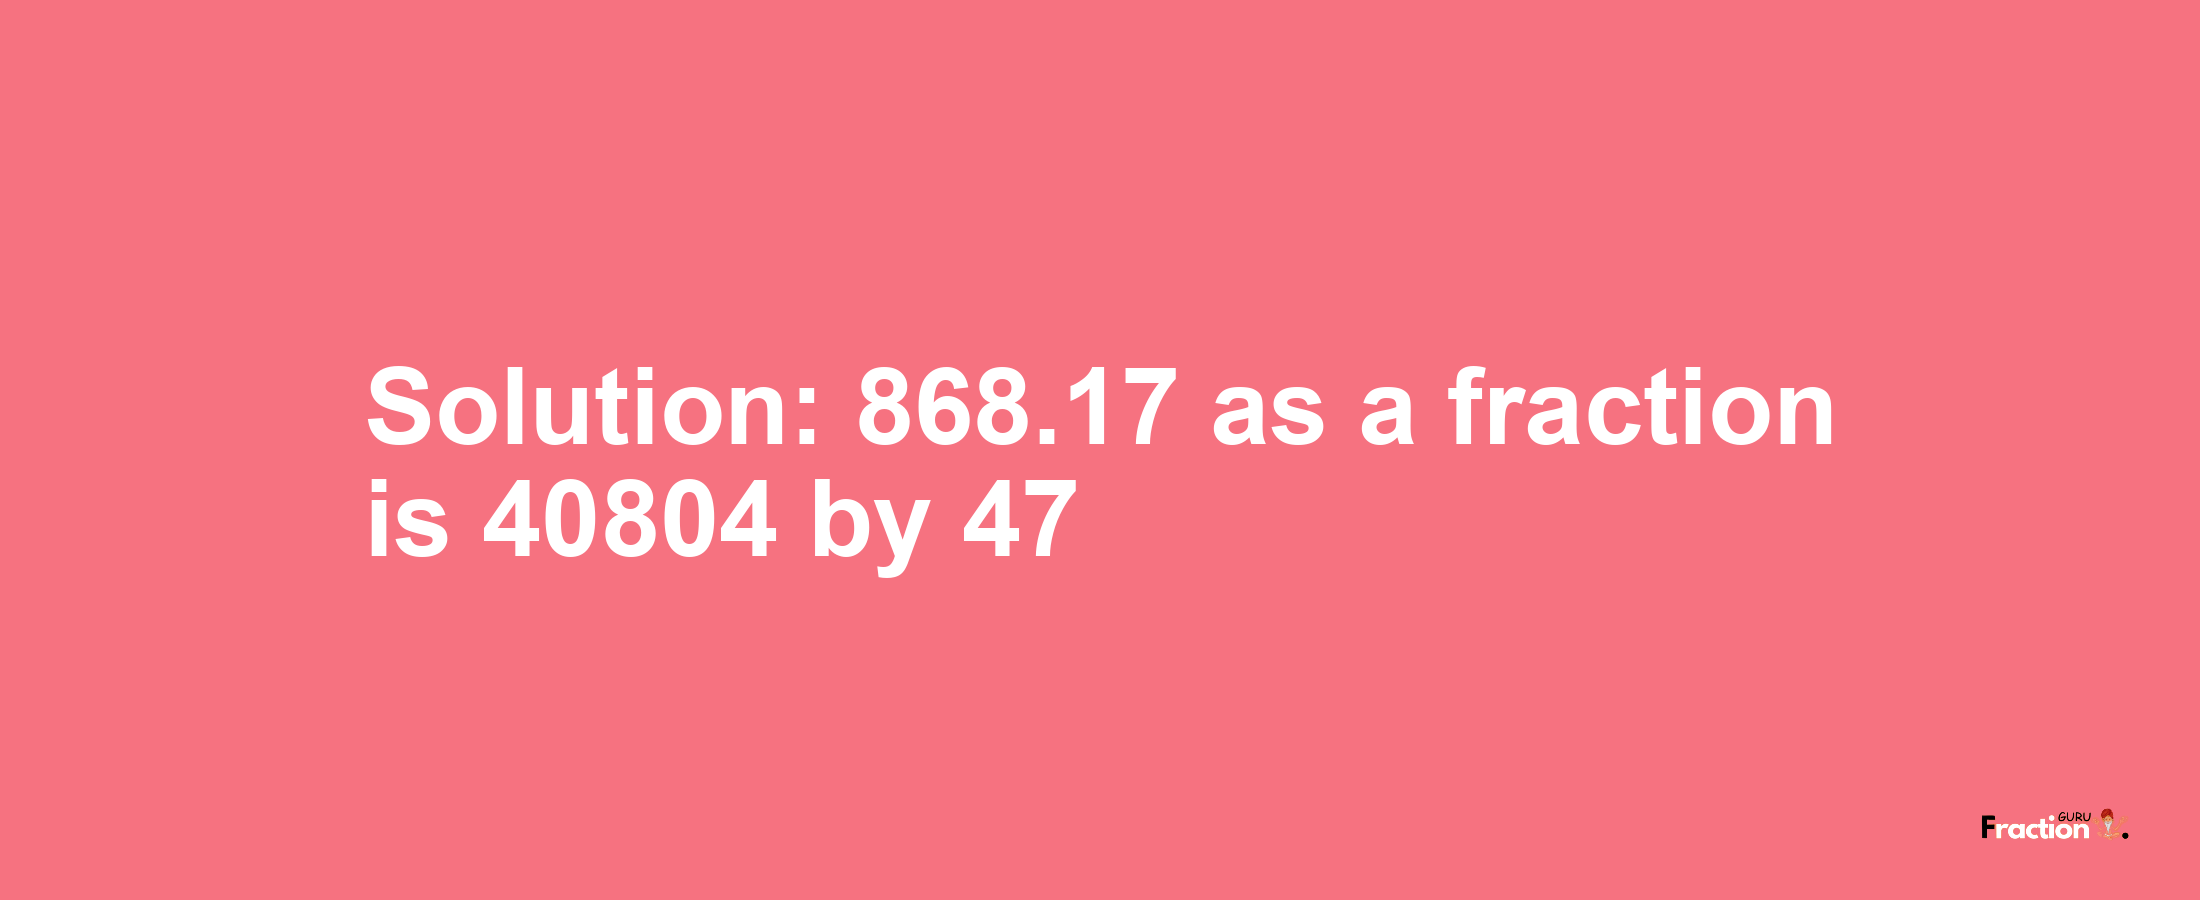 Solution:868.17 as a fraction is 40804/47